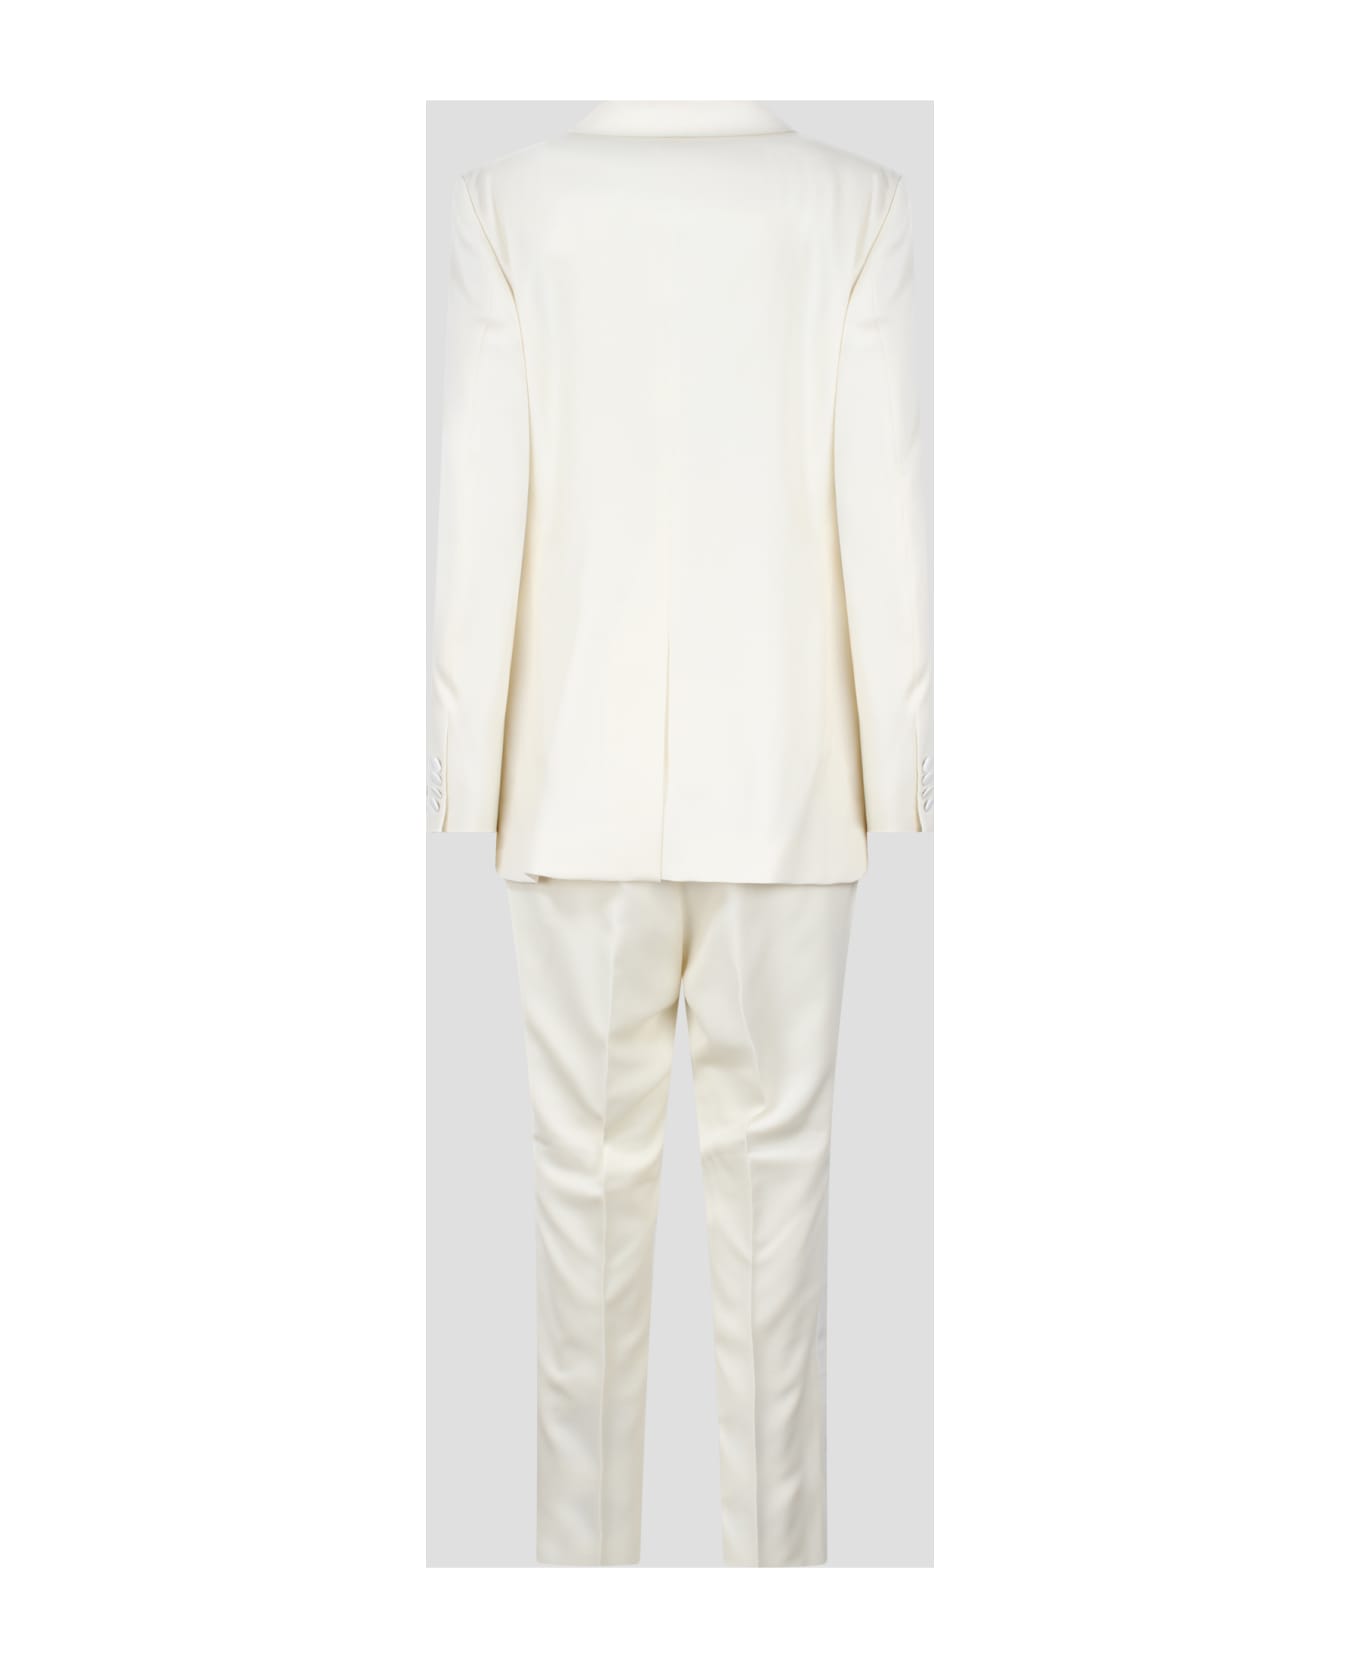 Dior Tailored Single Breasted Suit - White